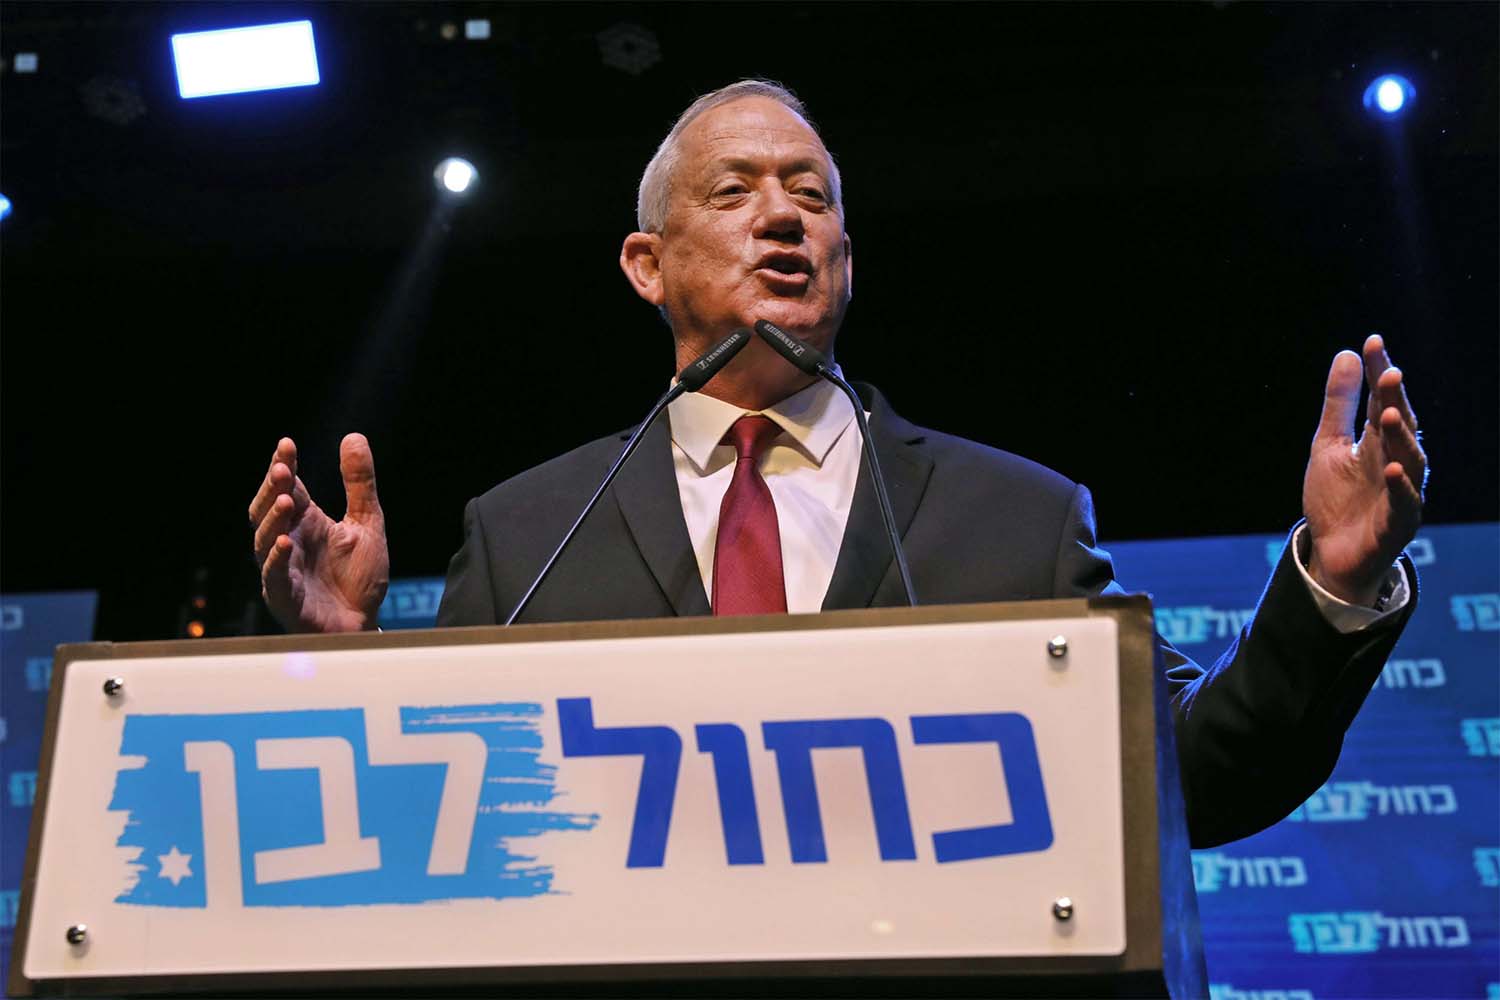 Benny Gantz, leader and candidate of the Israel Resilience party